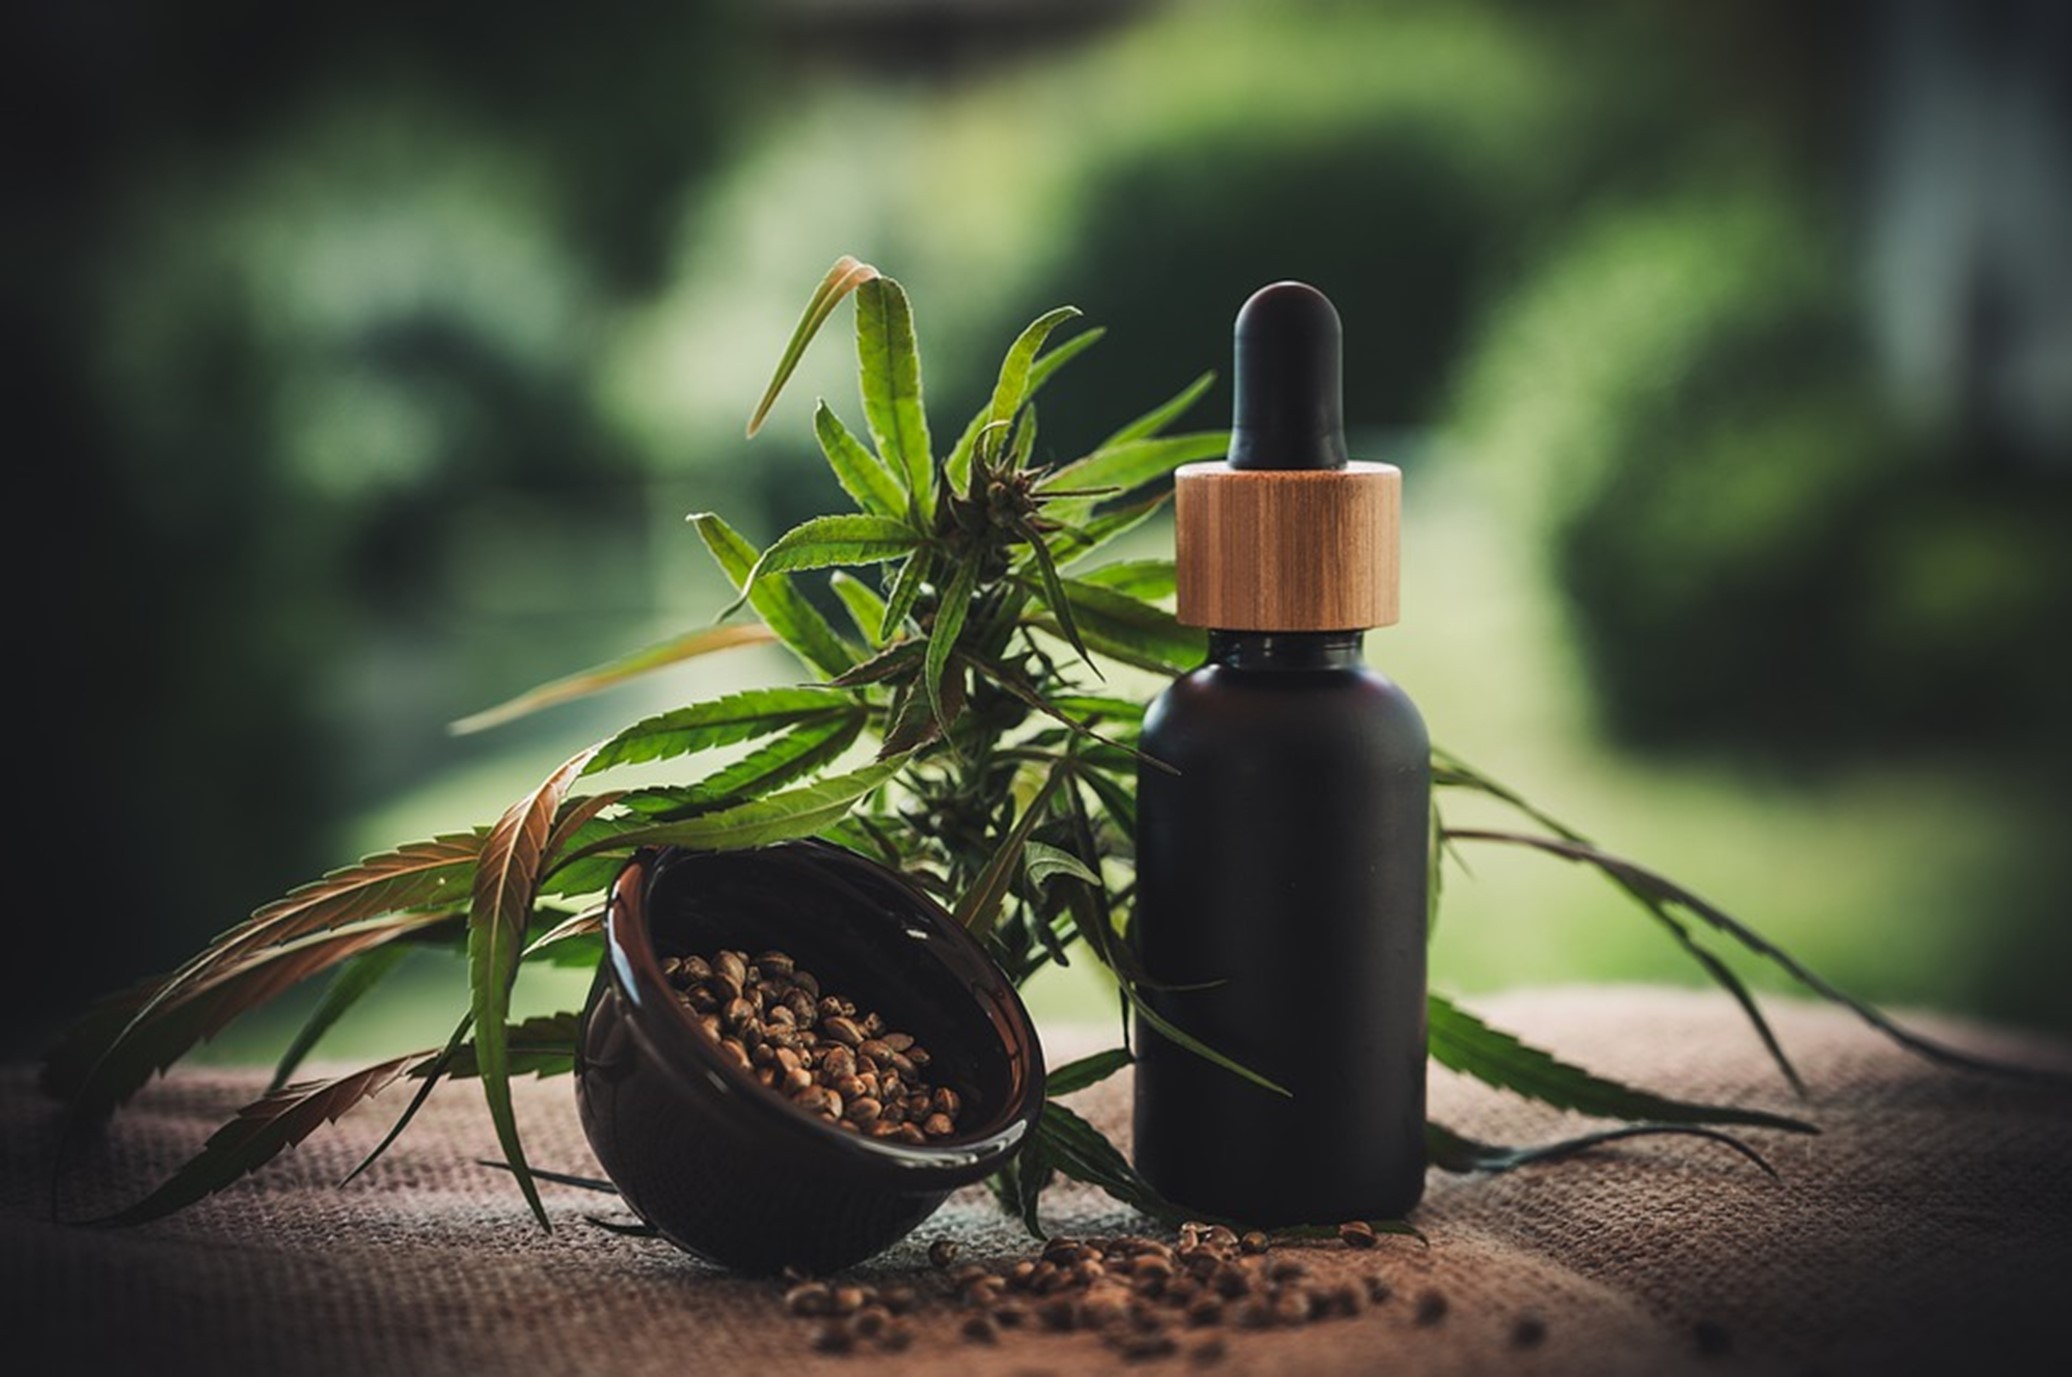 Cannabis and its products